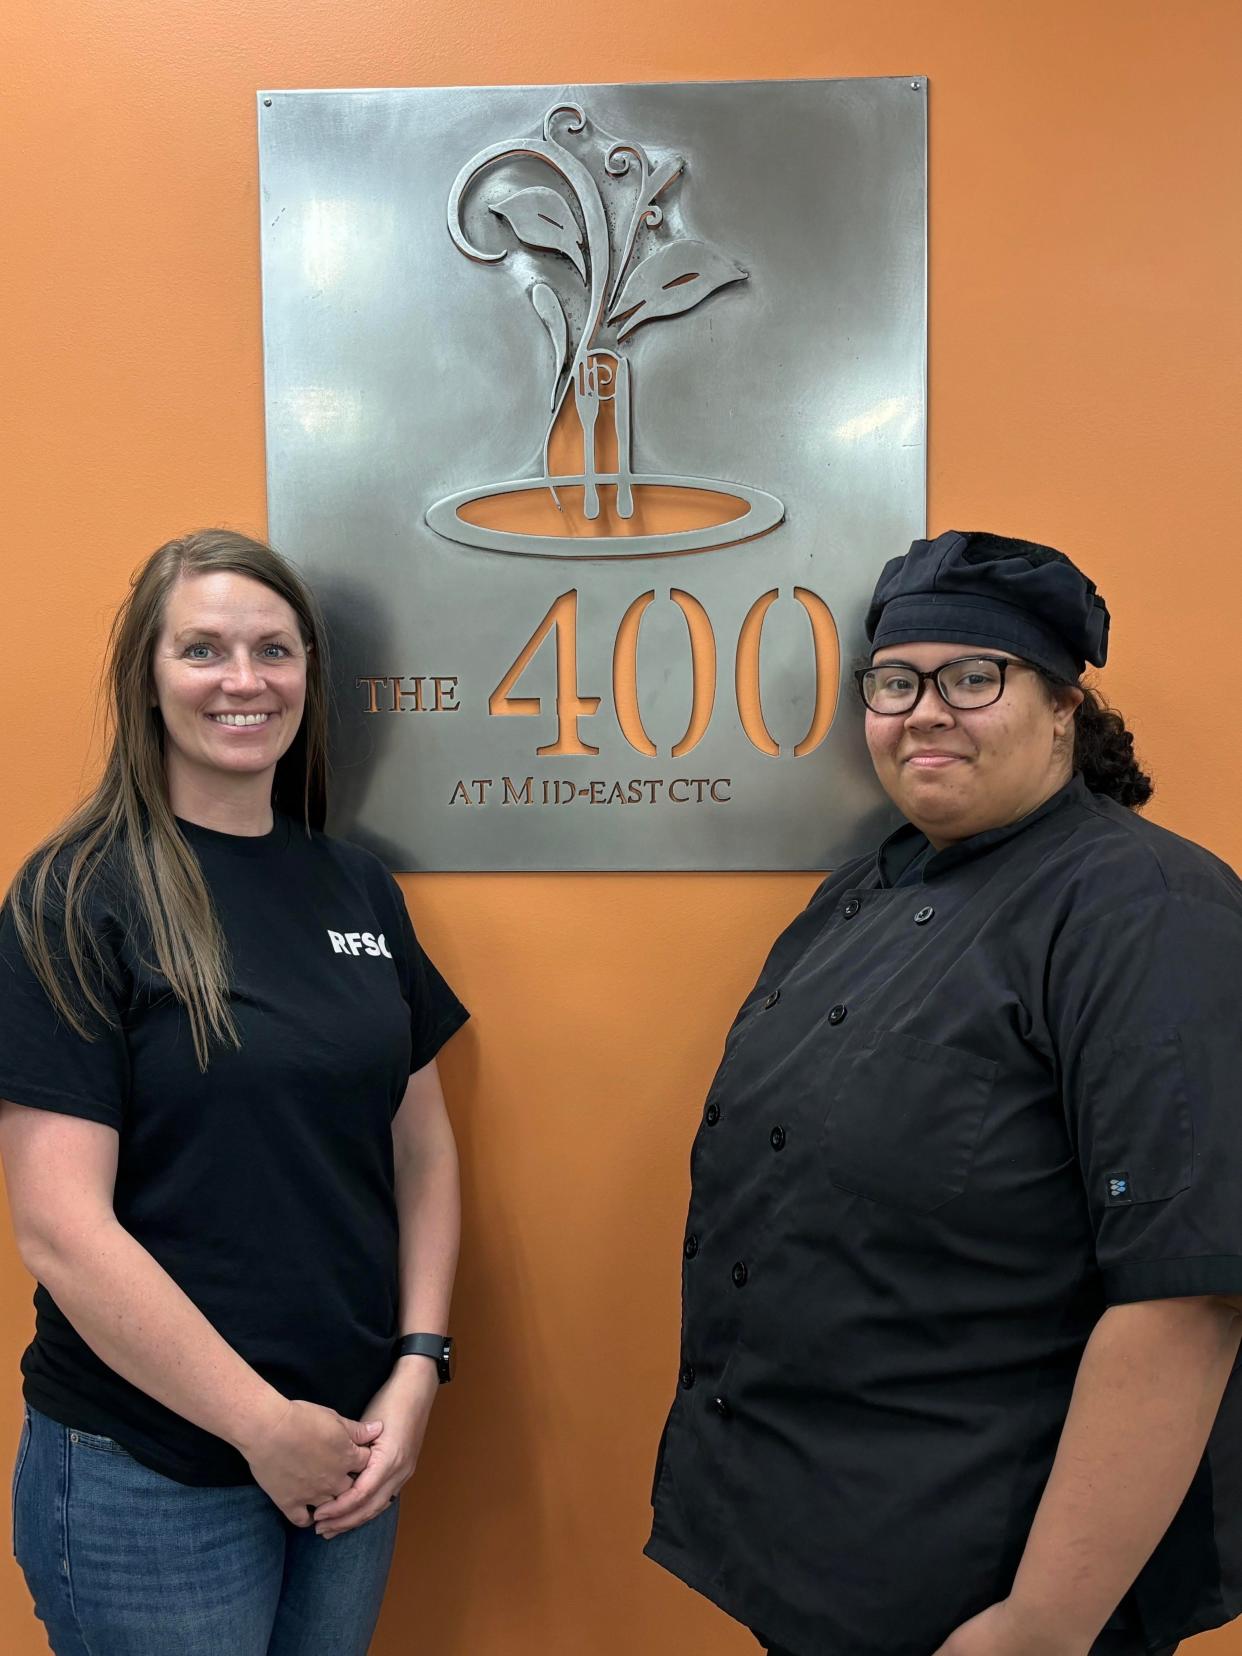 Jalena Lasko, left, runs the Restaurant and Food Service Operations program at Mid-East Career and Technology Centers and the program's licensed restaurant called The 400. She said senior Madison Yates, right, stands out because of her positivity and resiliency despite the many obstacles she's faced in her life. Yates will graduate May 21 and was accepted to Tiffin University for business management.